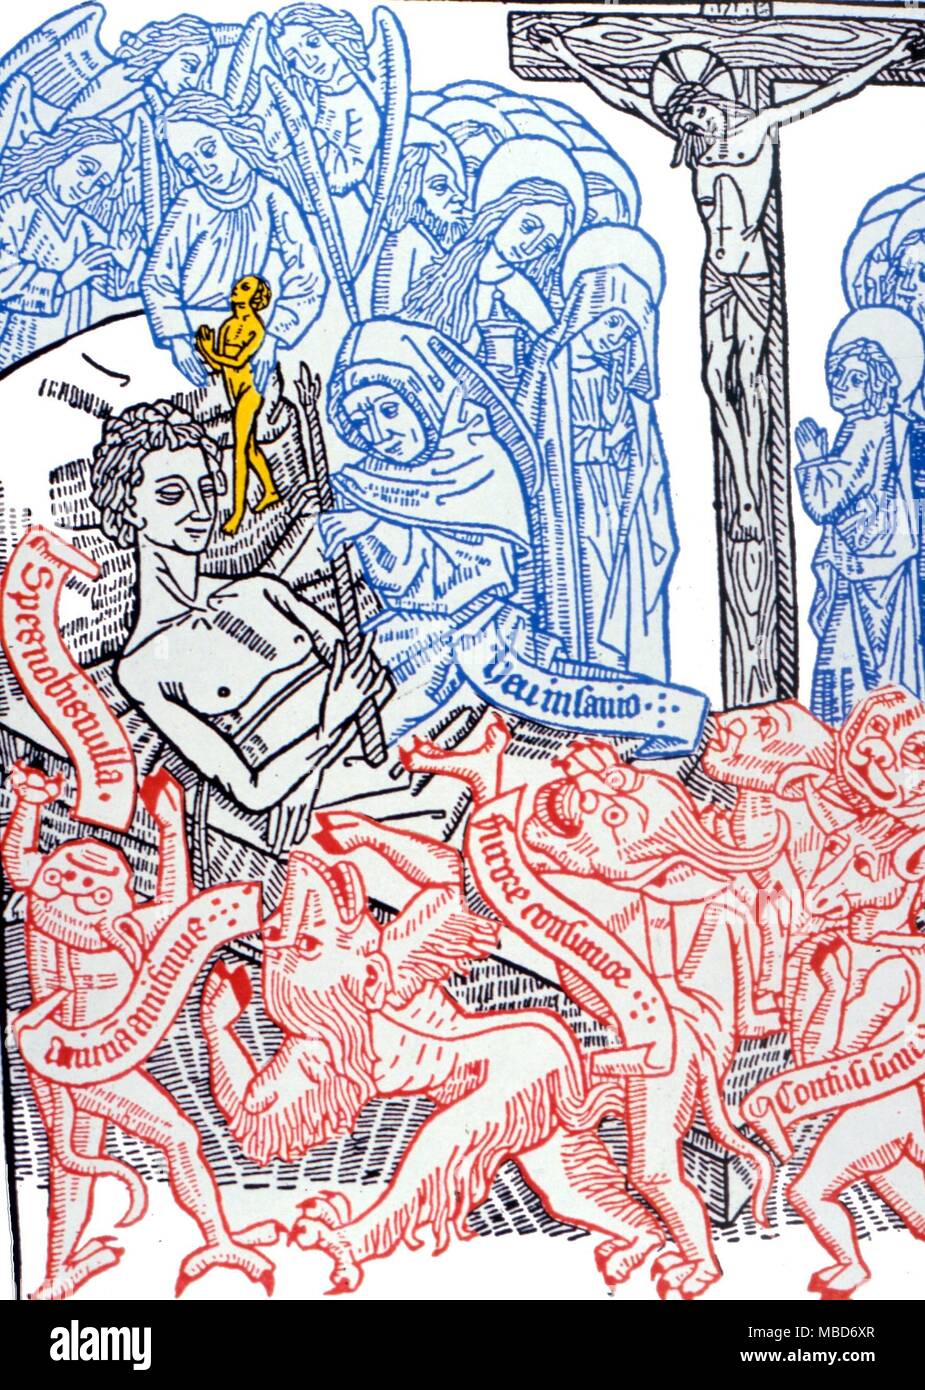 Demons at deathbed - Hords of demons at a deathbed, waiting to struggle for the soul of the newly deceased. From a German blackbook, Ara Morendi Bene - circa 1460 Stock Photo